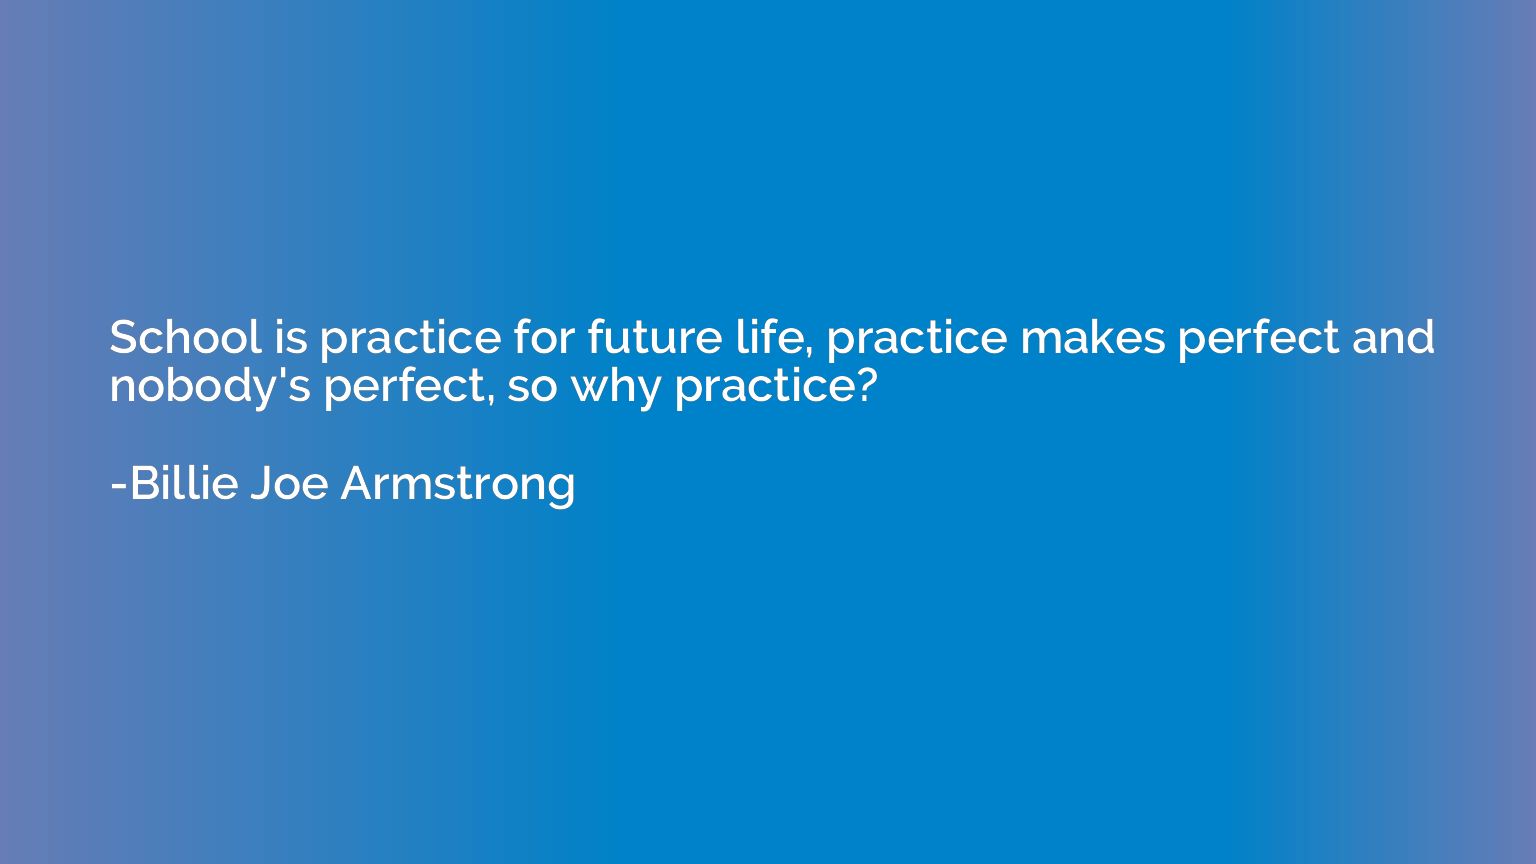 School is practice for future life, practice makes perfect a